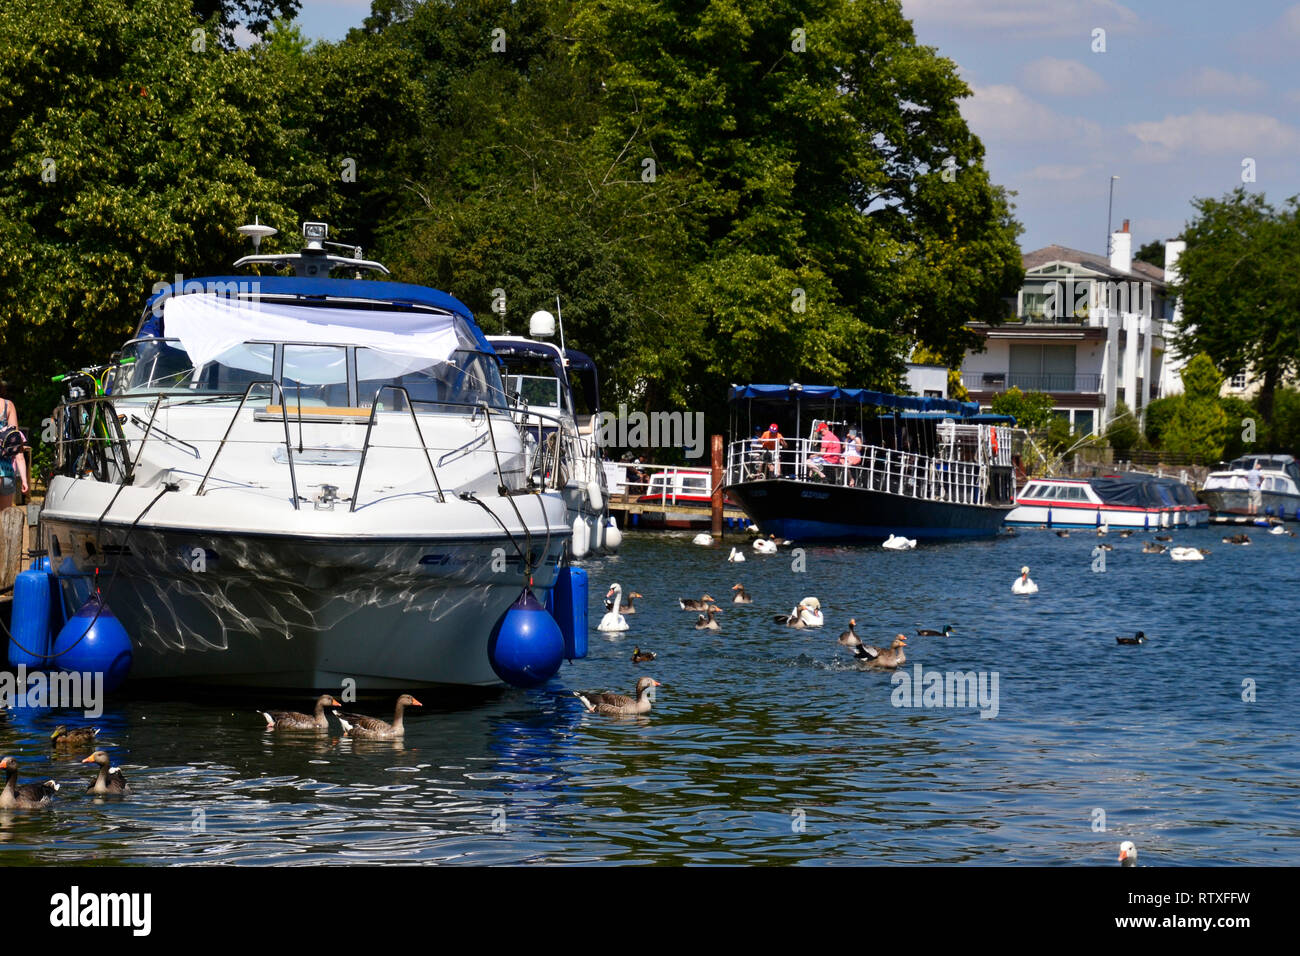 The River Thames in Marlow, Buckinghamshire, England, UK Stock Photo